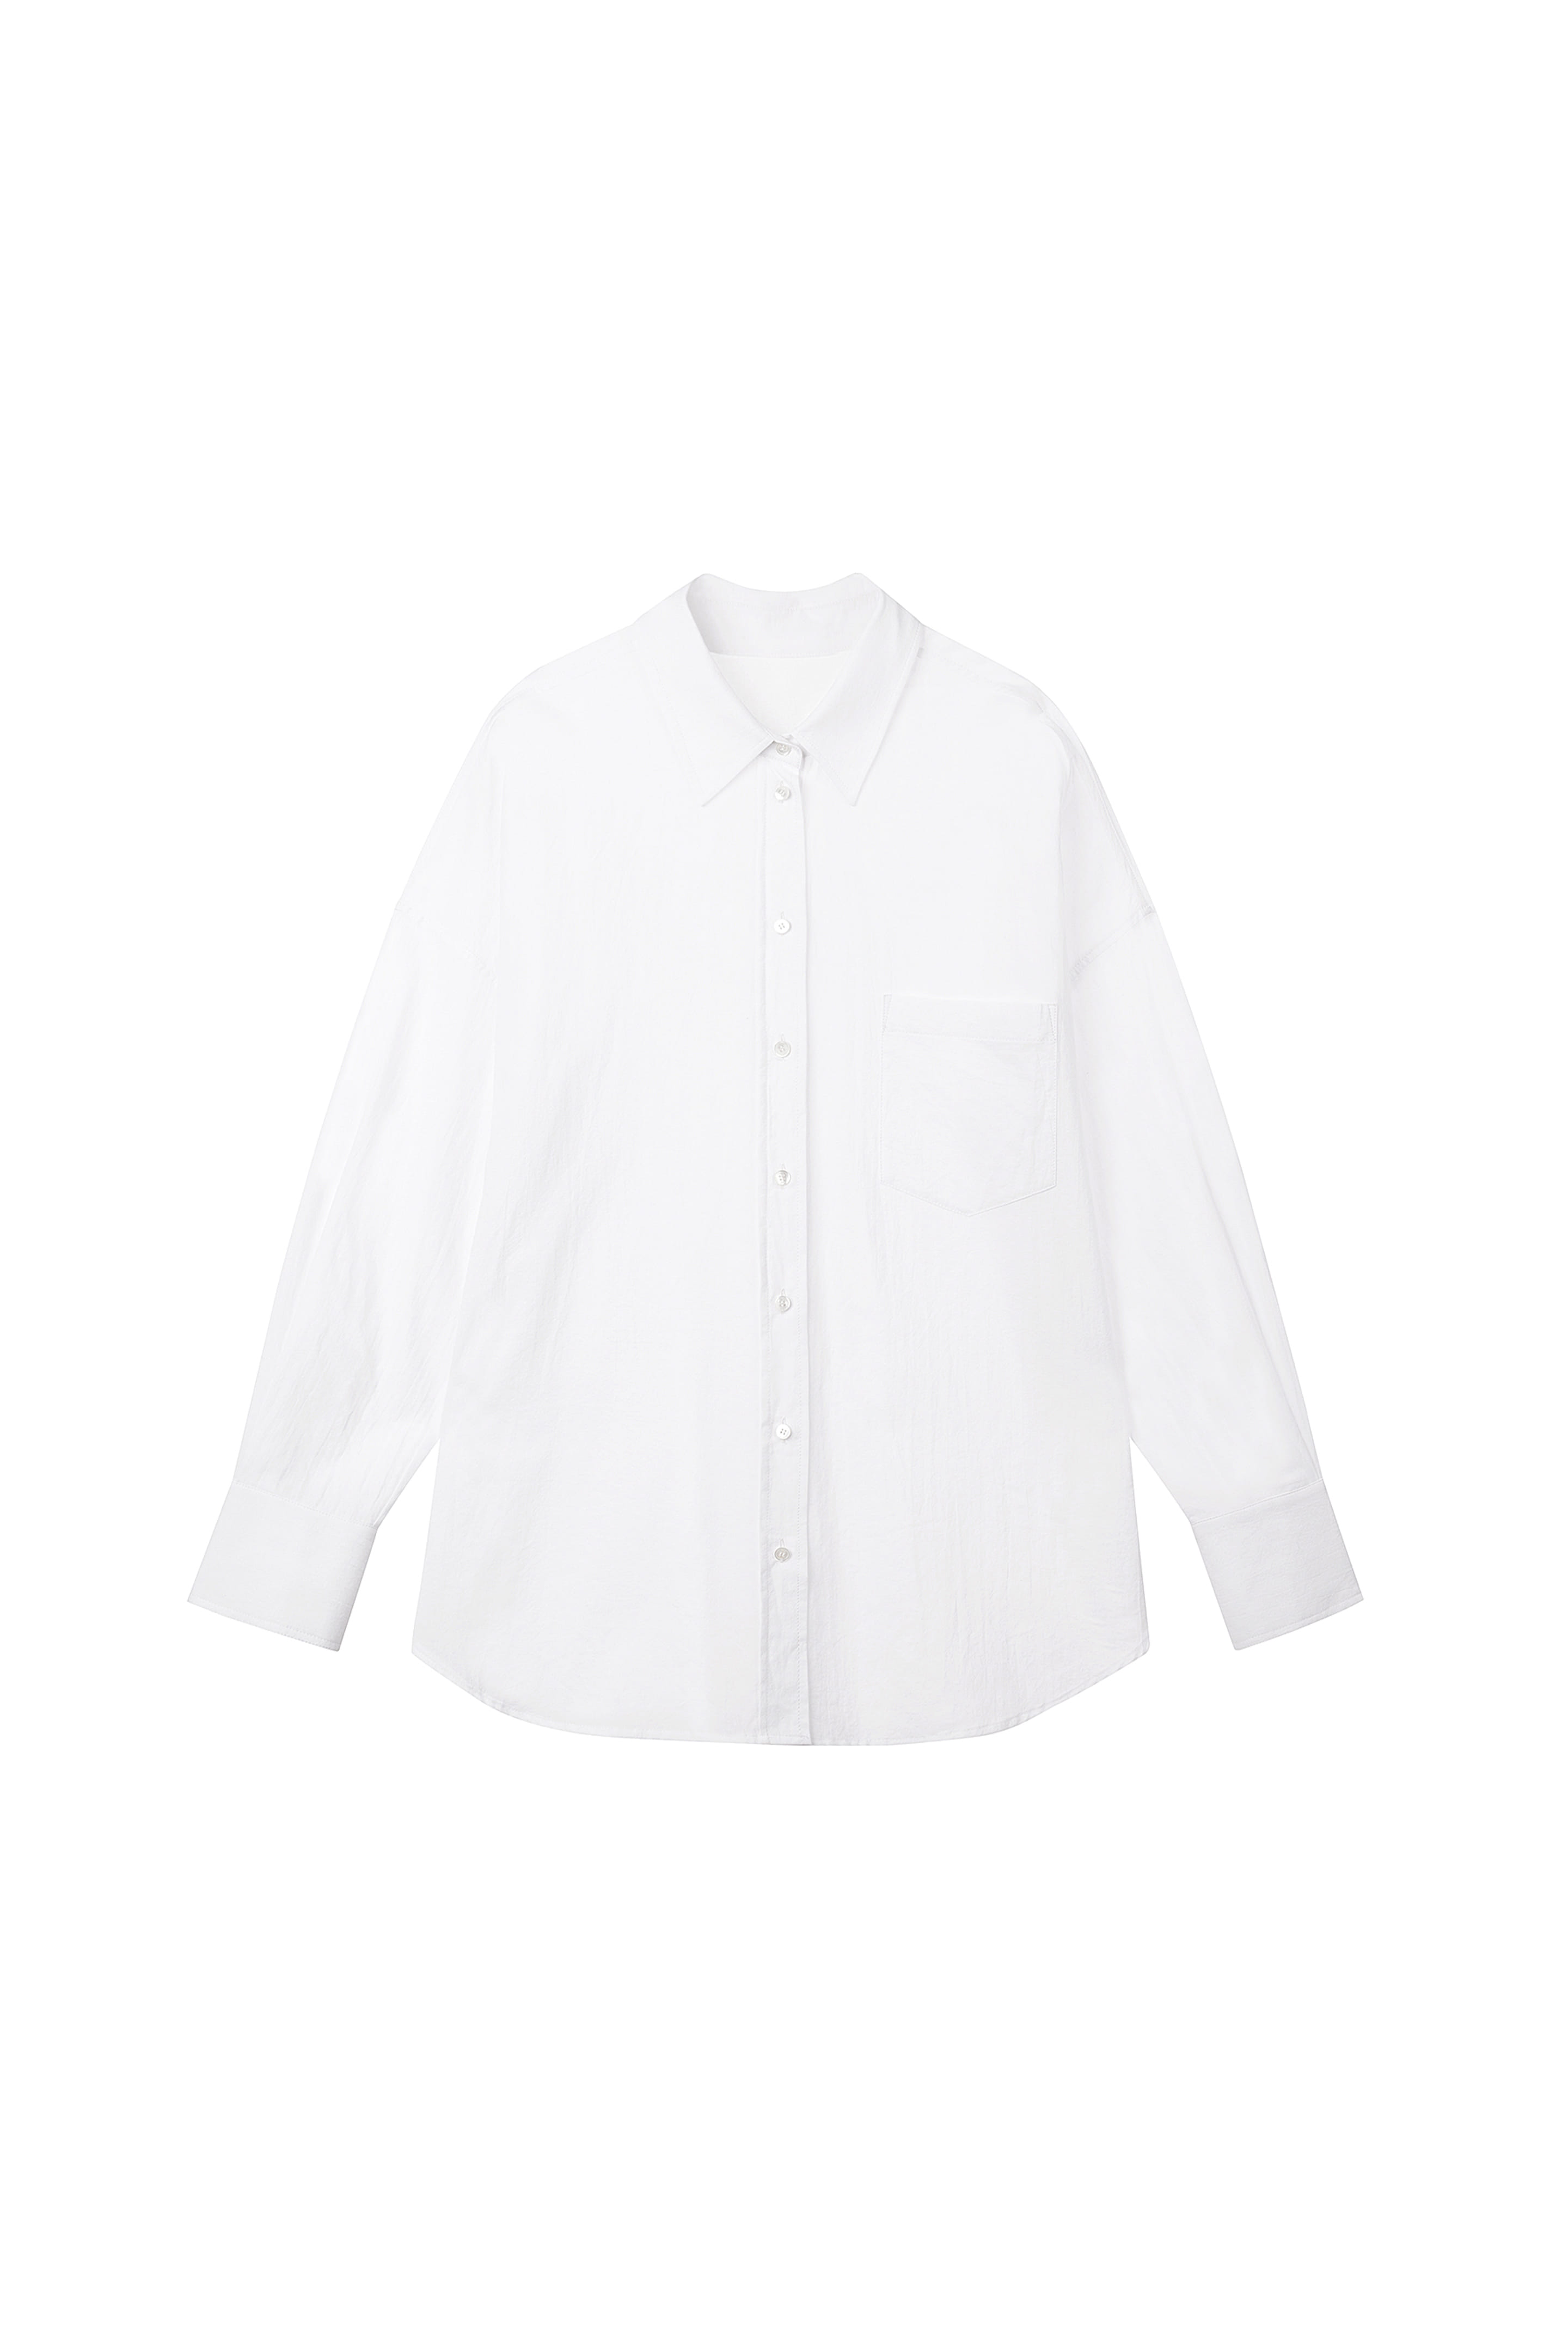 3rd) Cotton Shirts Over-sized White